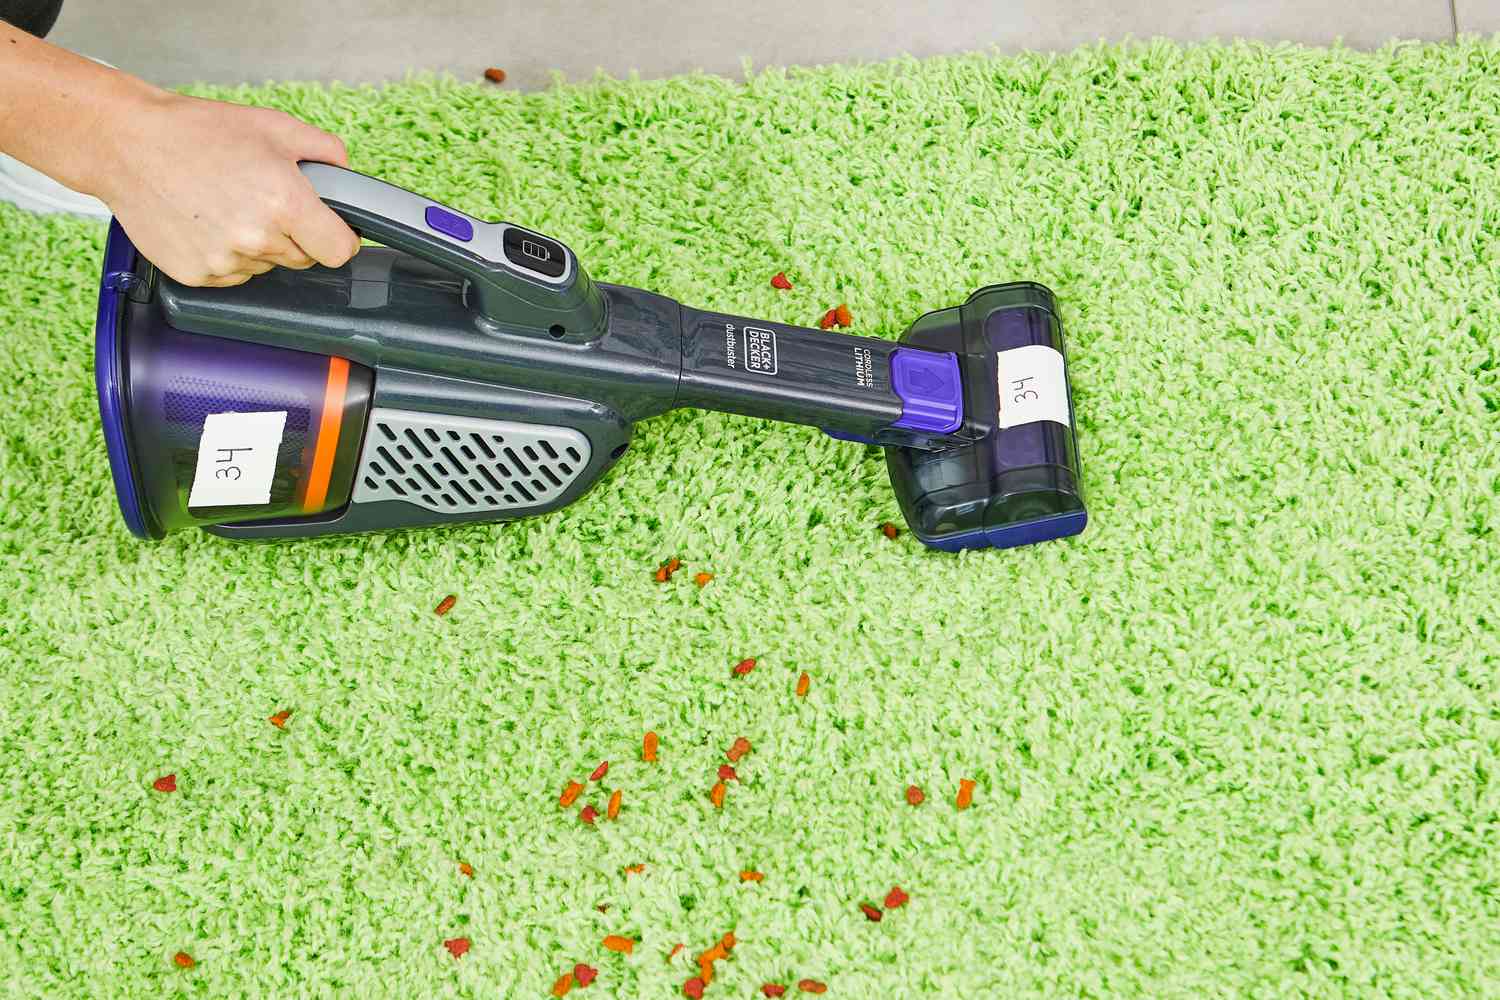 Hand using the Black+Decker Dustbuster AdvancedClean+ Pet Cordless Hand Vacuum Cleaner to clean pet food from a green carpet